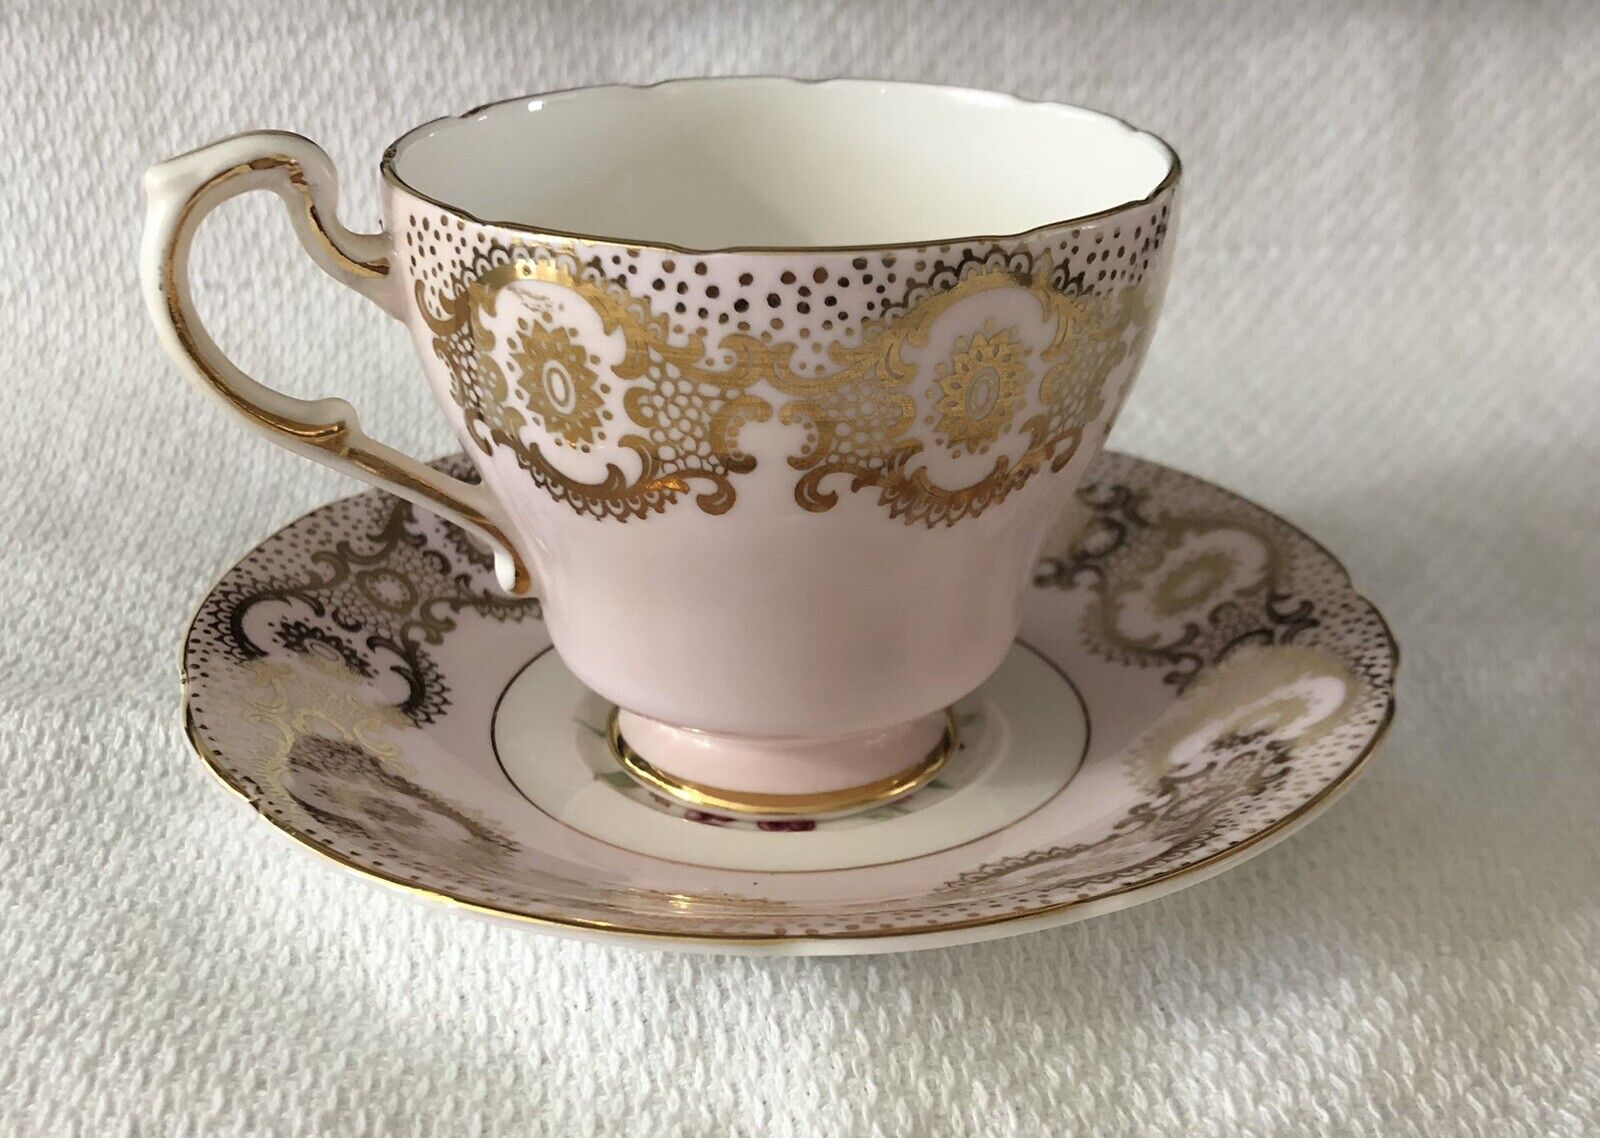 Vintage Paragon Tea Cup & Saucer Pink w/ Fruit and Gold Trim and Accents   FG8C